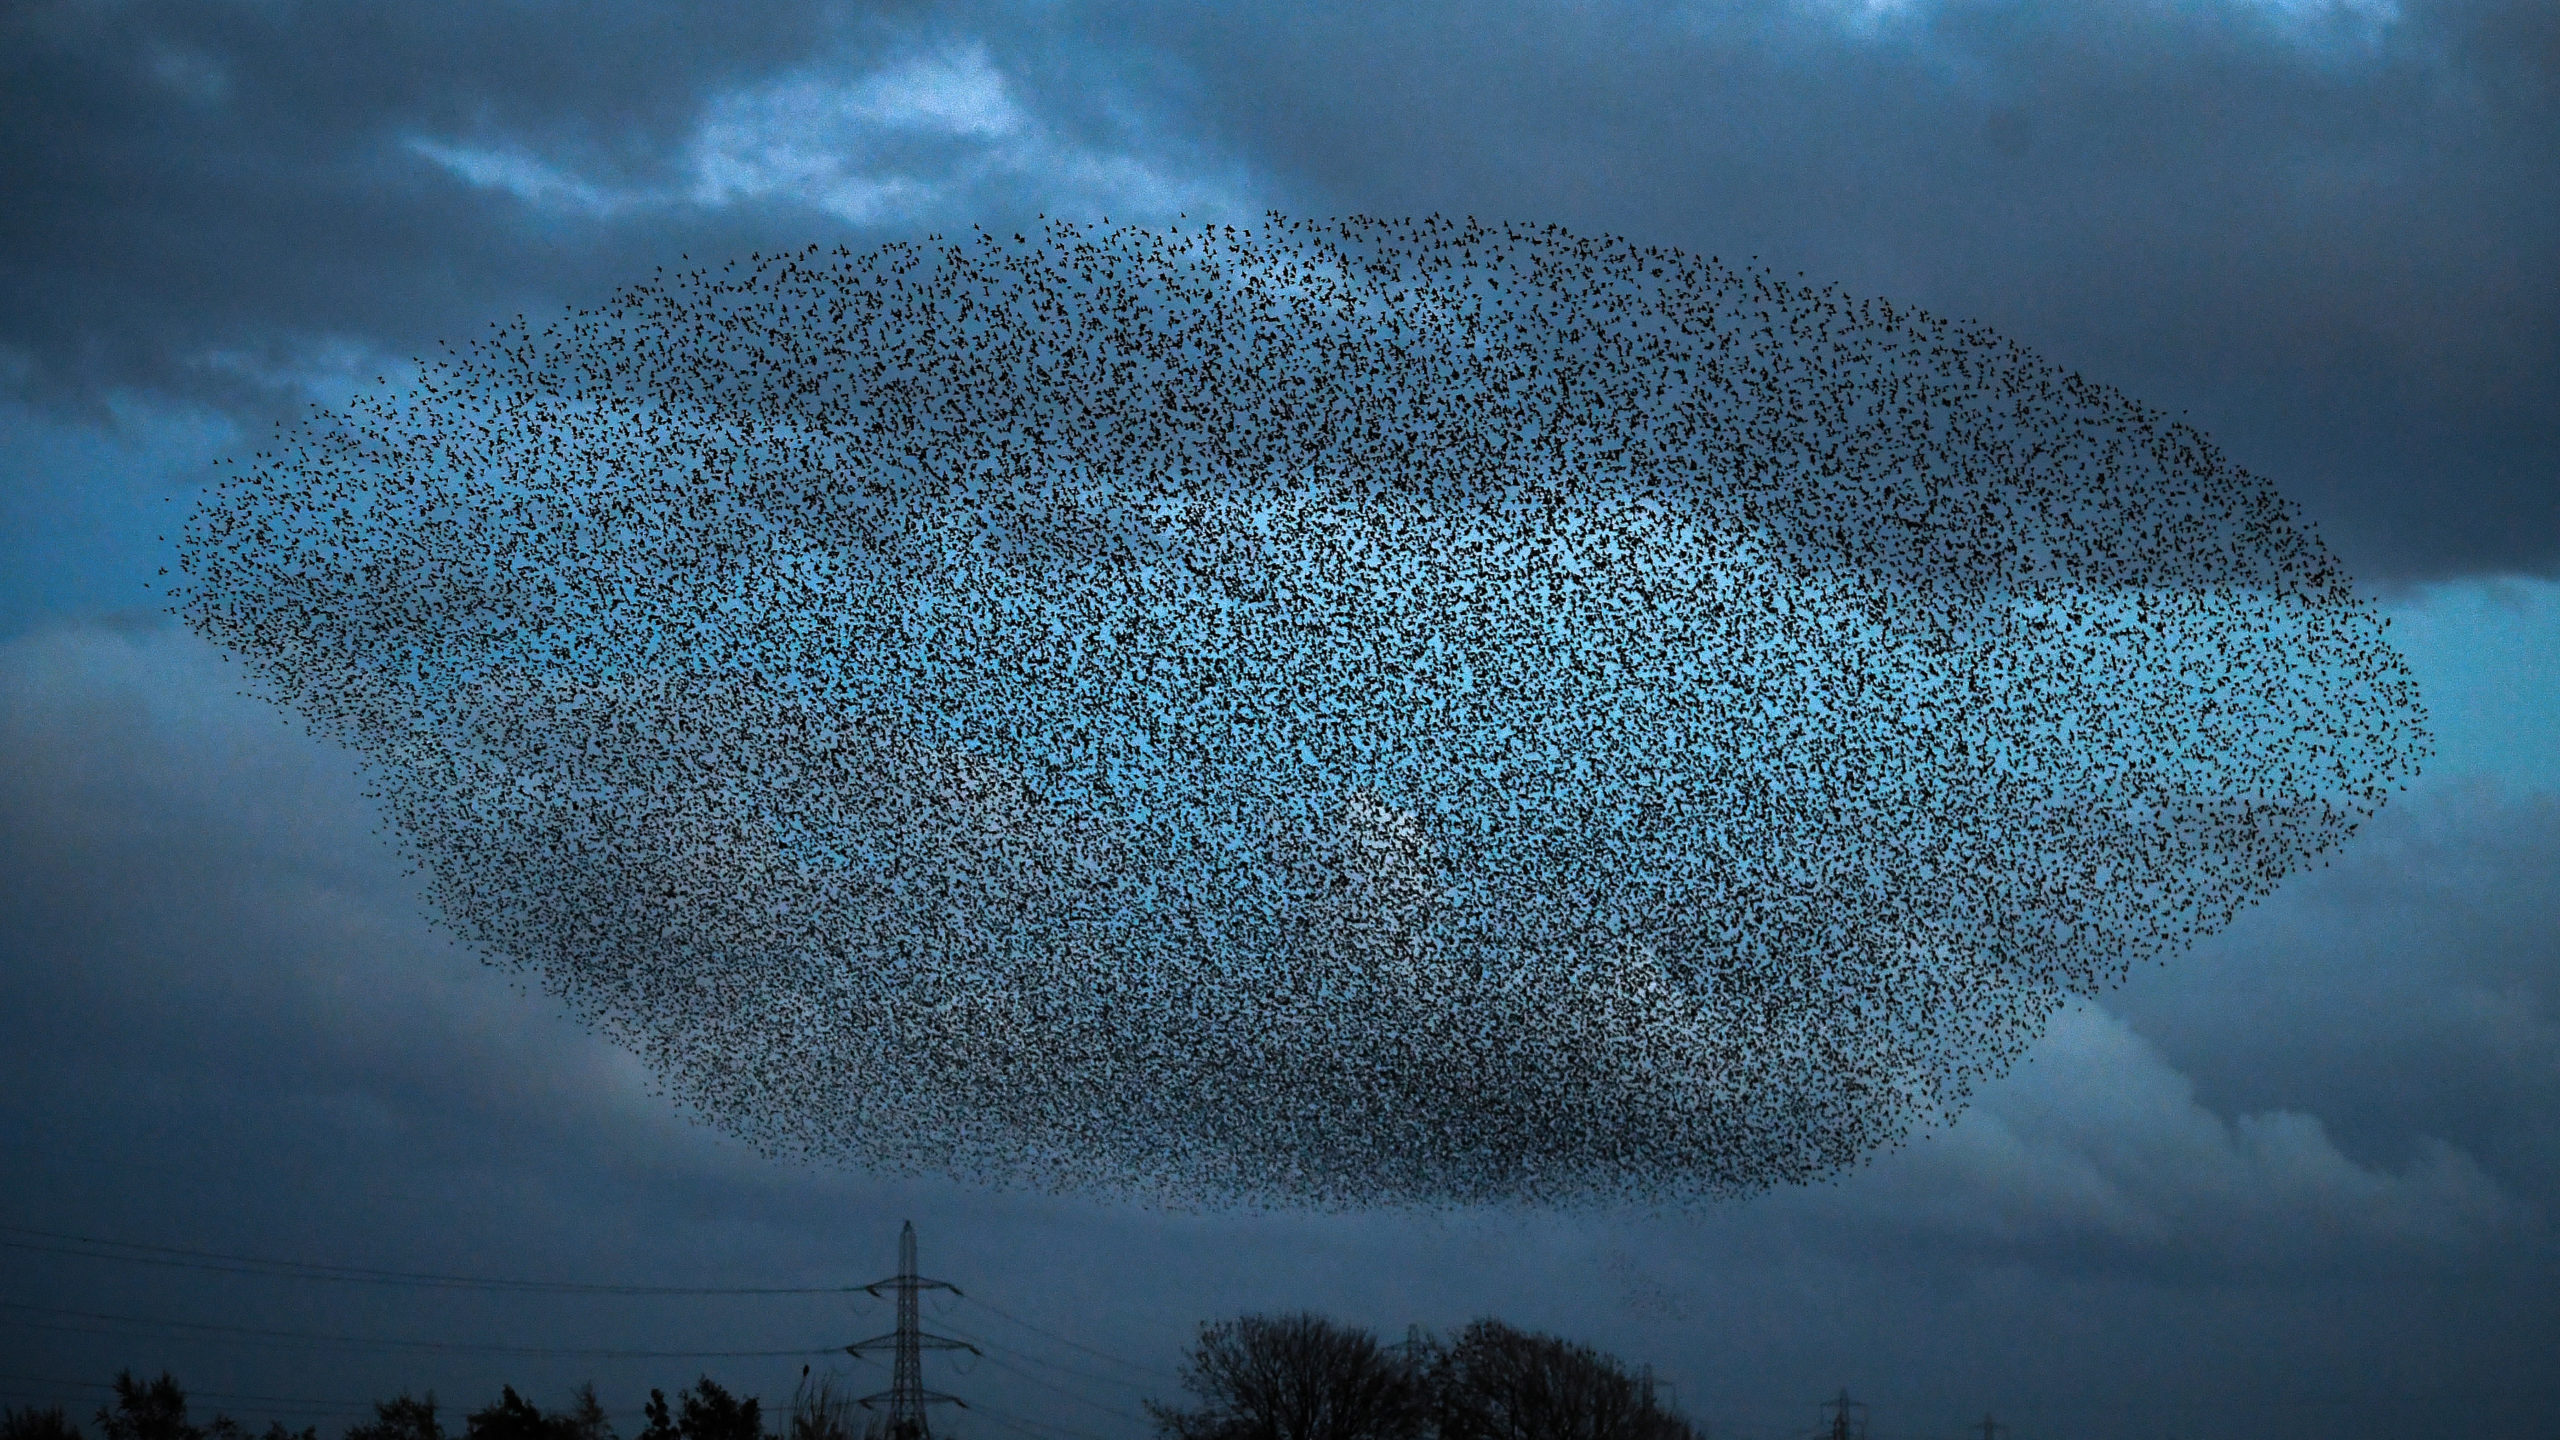 The murmuration captured in these photos took place in Scotland, but you can find the birds in the U.S. as well. (Photo: Jeff J Mitchell, Getty Images)